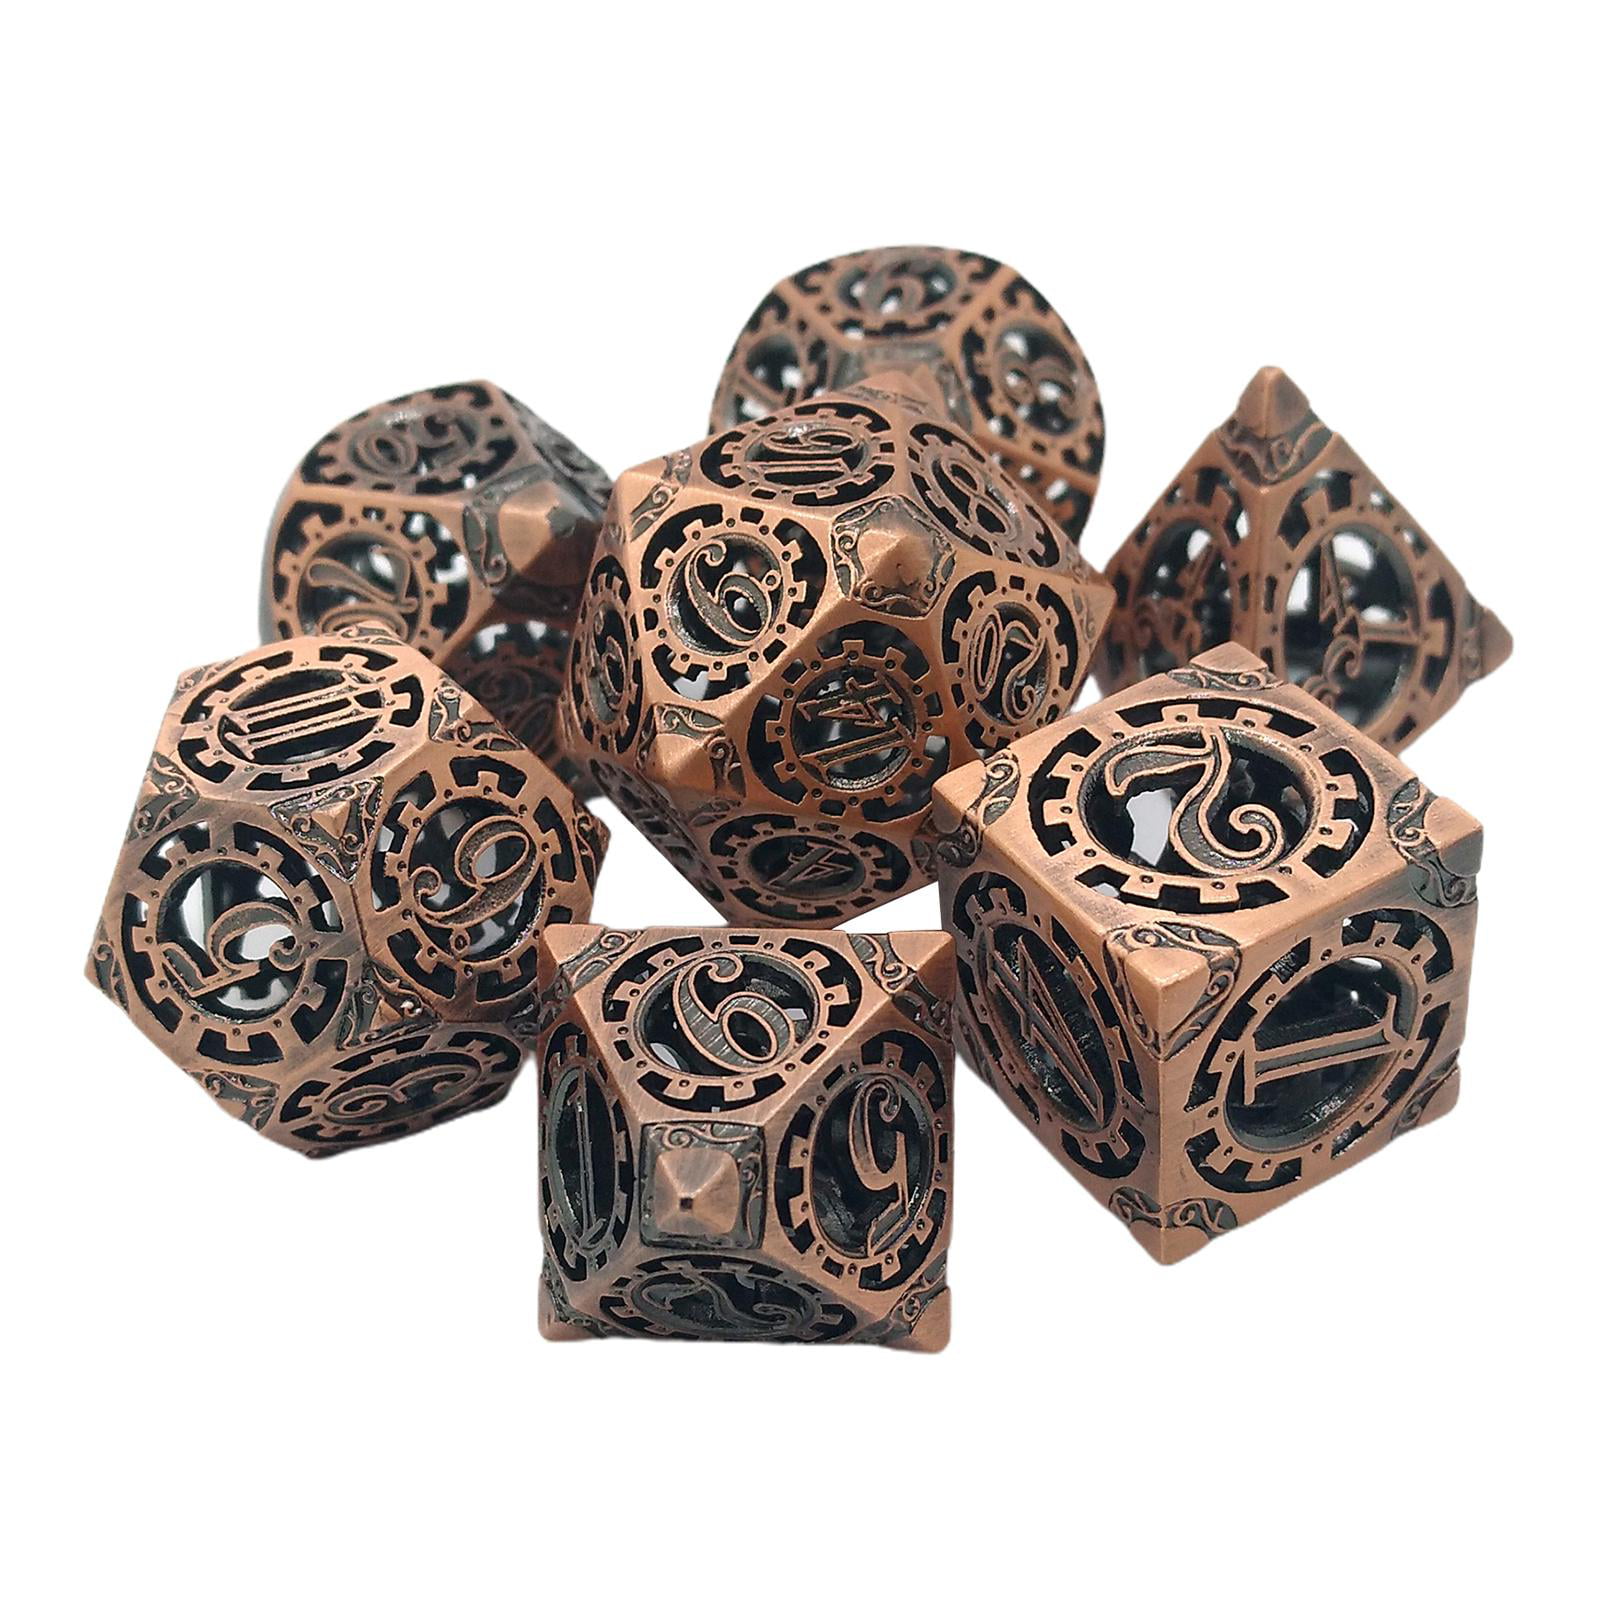 7Pcs Hollow Metal DND Game Dice Steampunk Gear Wheel for RPG MTG Table Games 